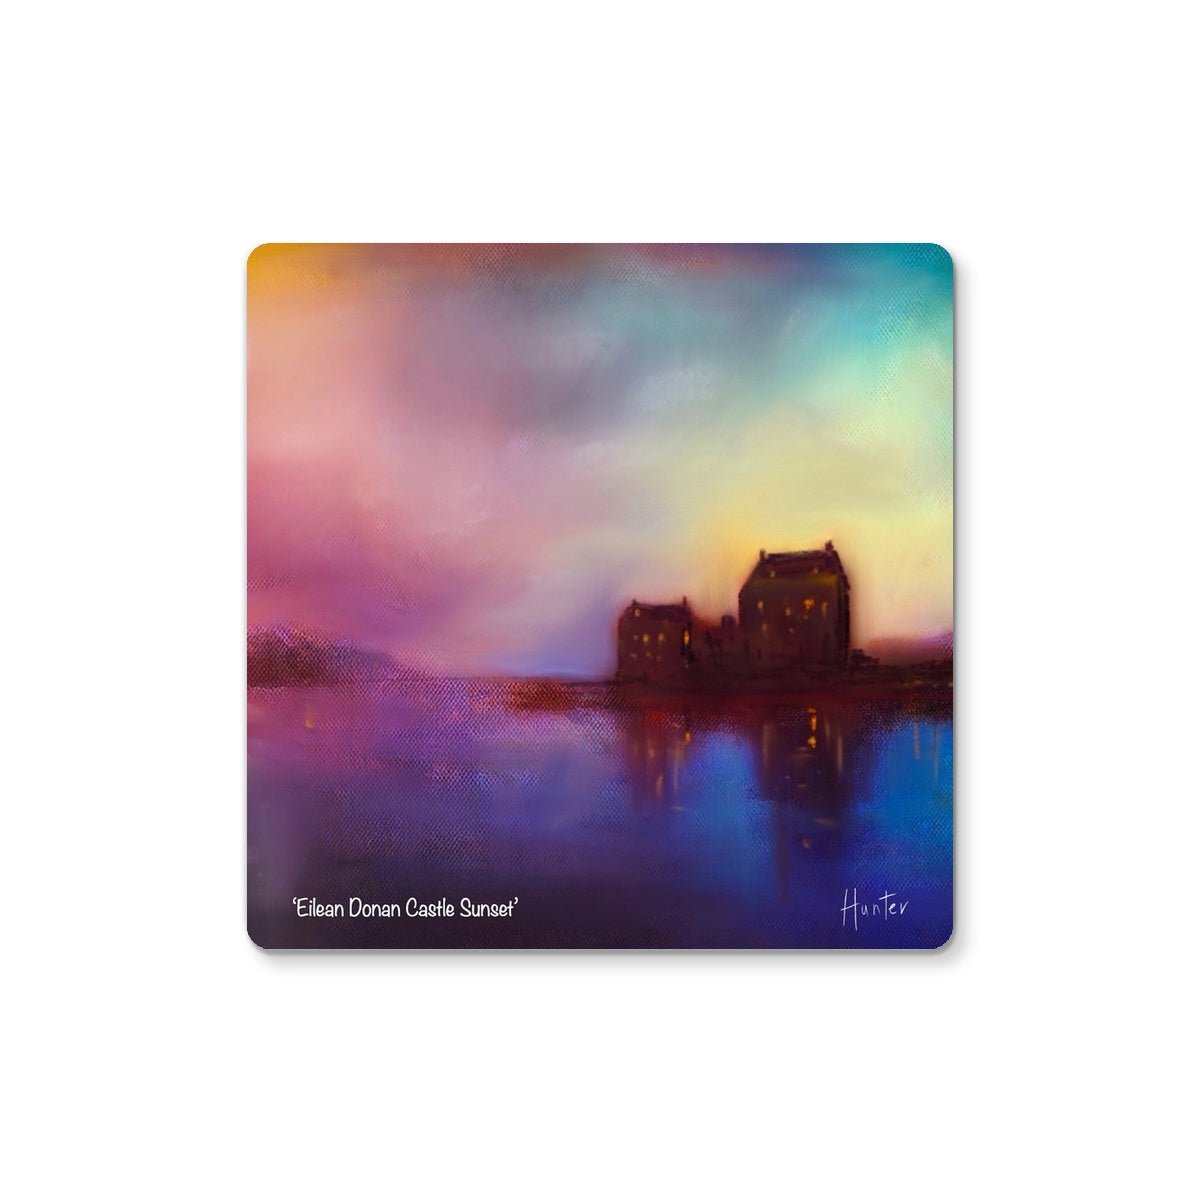 Eilean Donan Castle Sunset Art Gifts Coaster-Coasters-Scottish Castles Art Gallery-4 Coasters-Paintings, Prints, Homeware, Art Gifts From Scotland By Scottish Artist Kevin Hunter